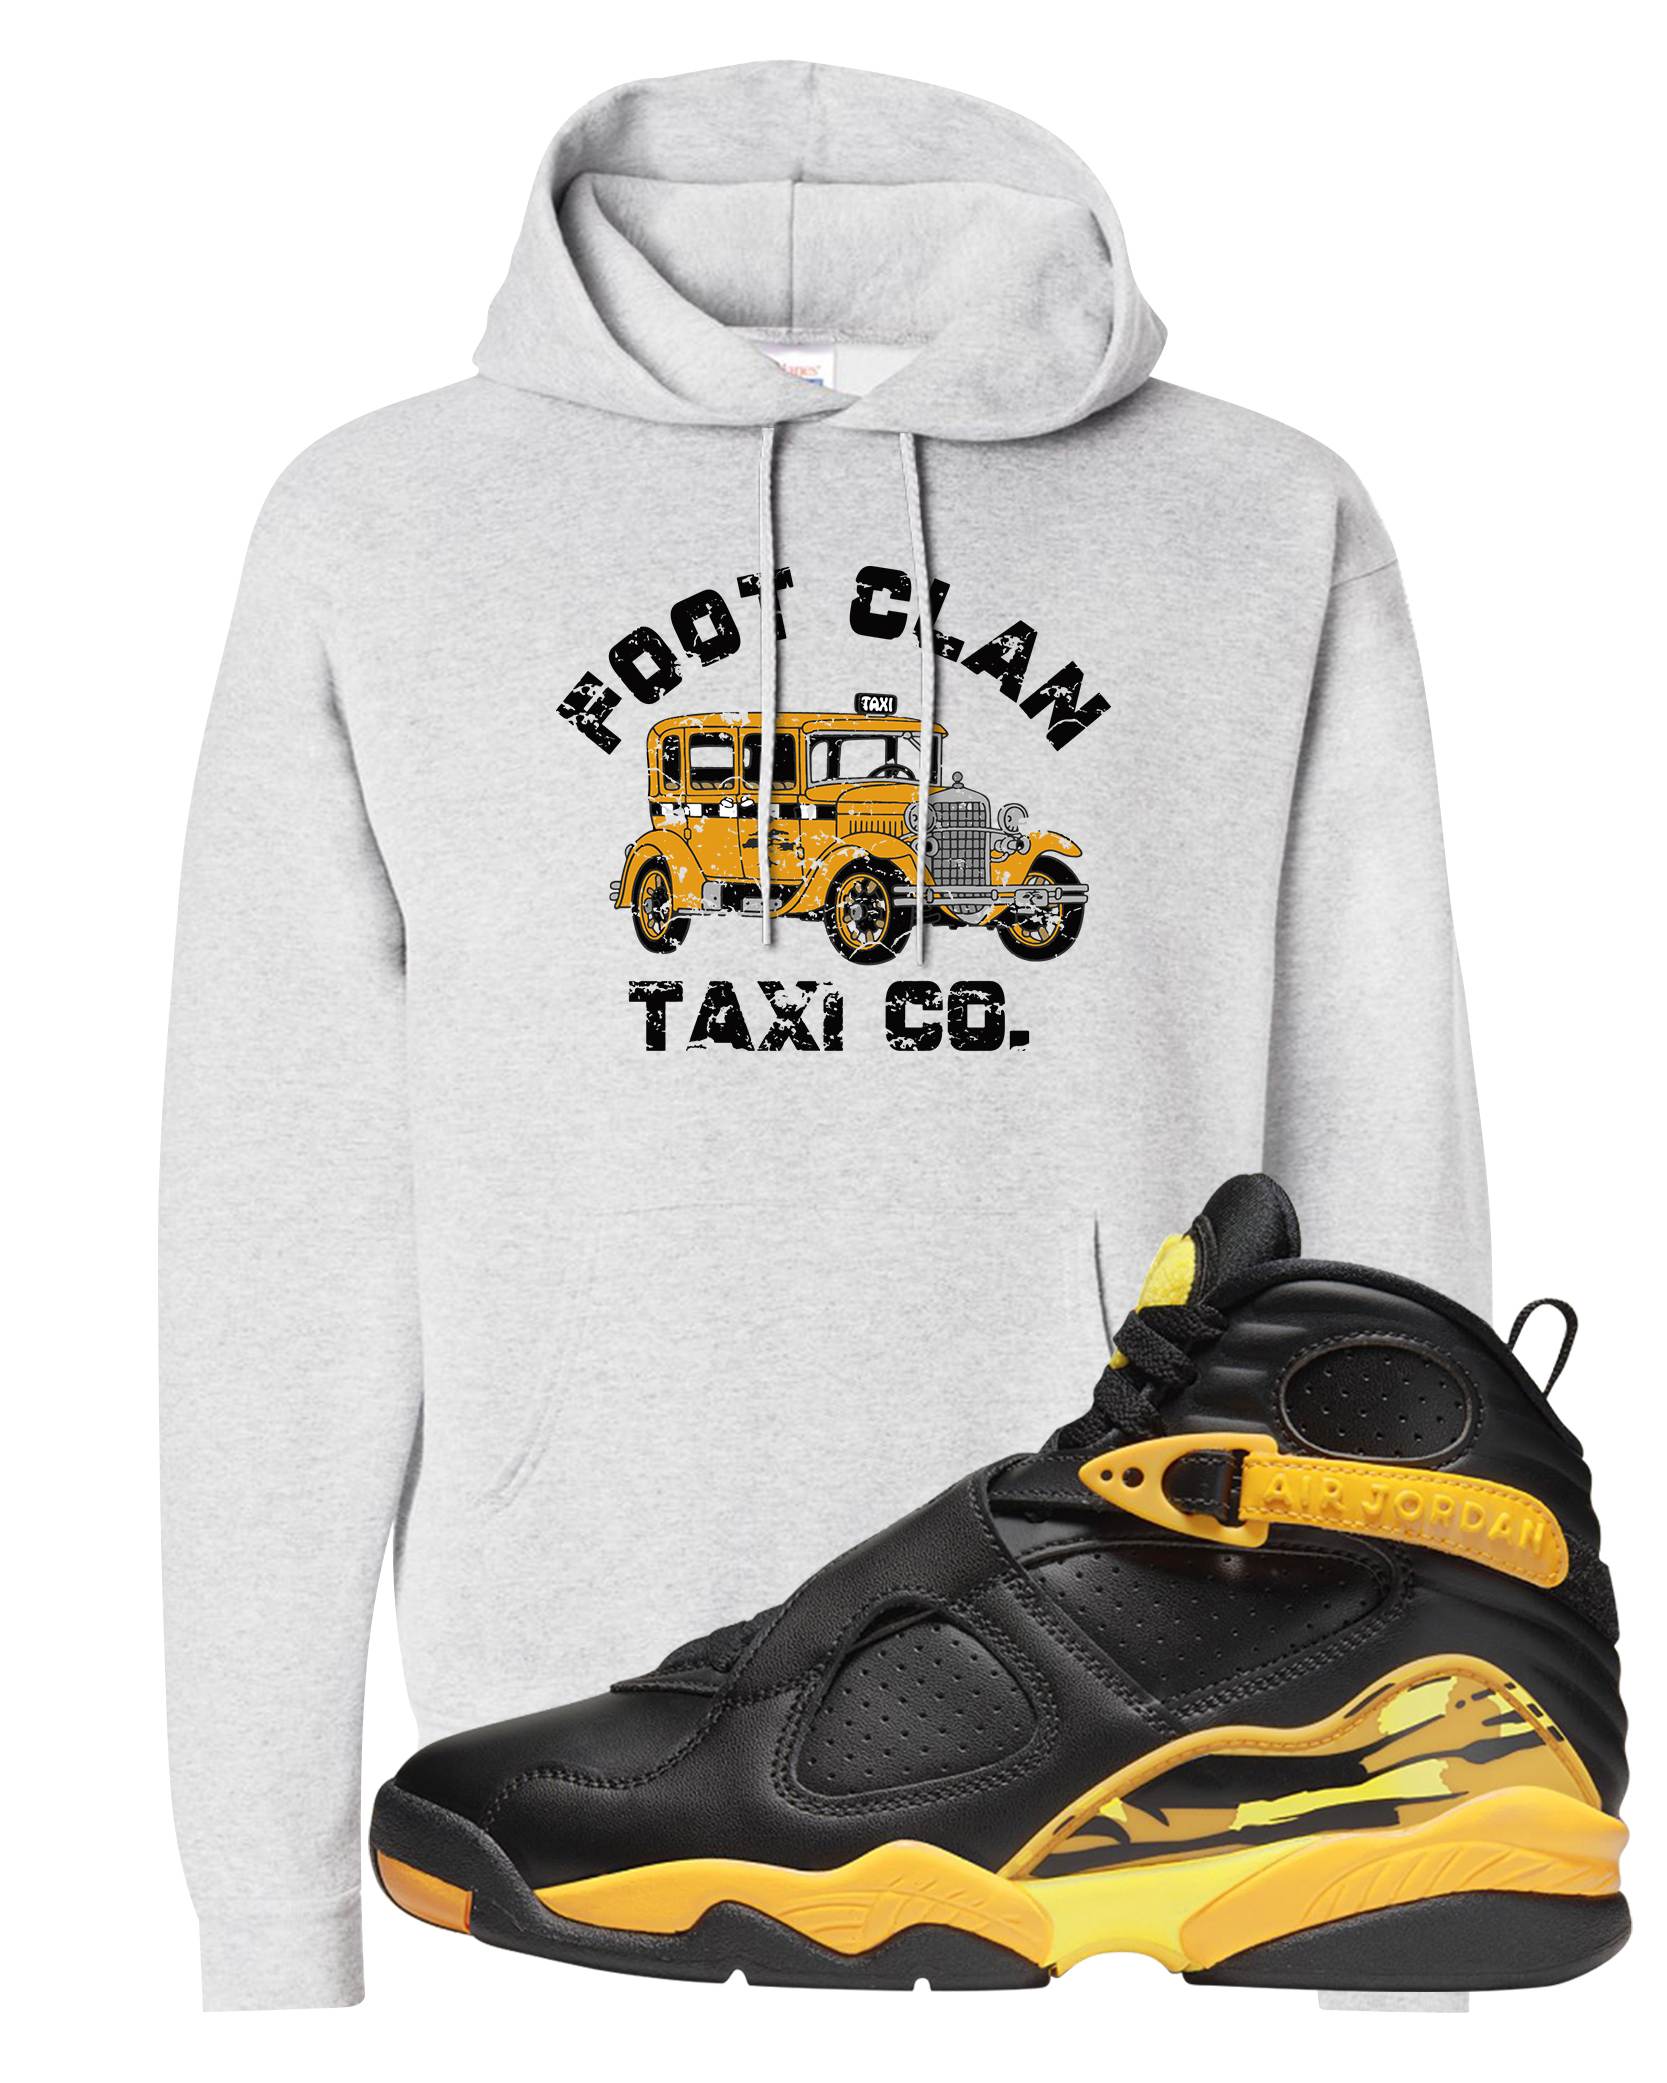 Taxi 8s Hoodie | Foot Clan Taxi Co., Ash